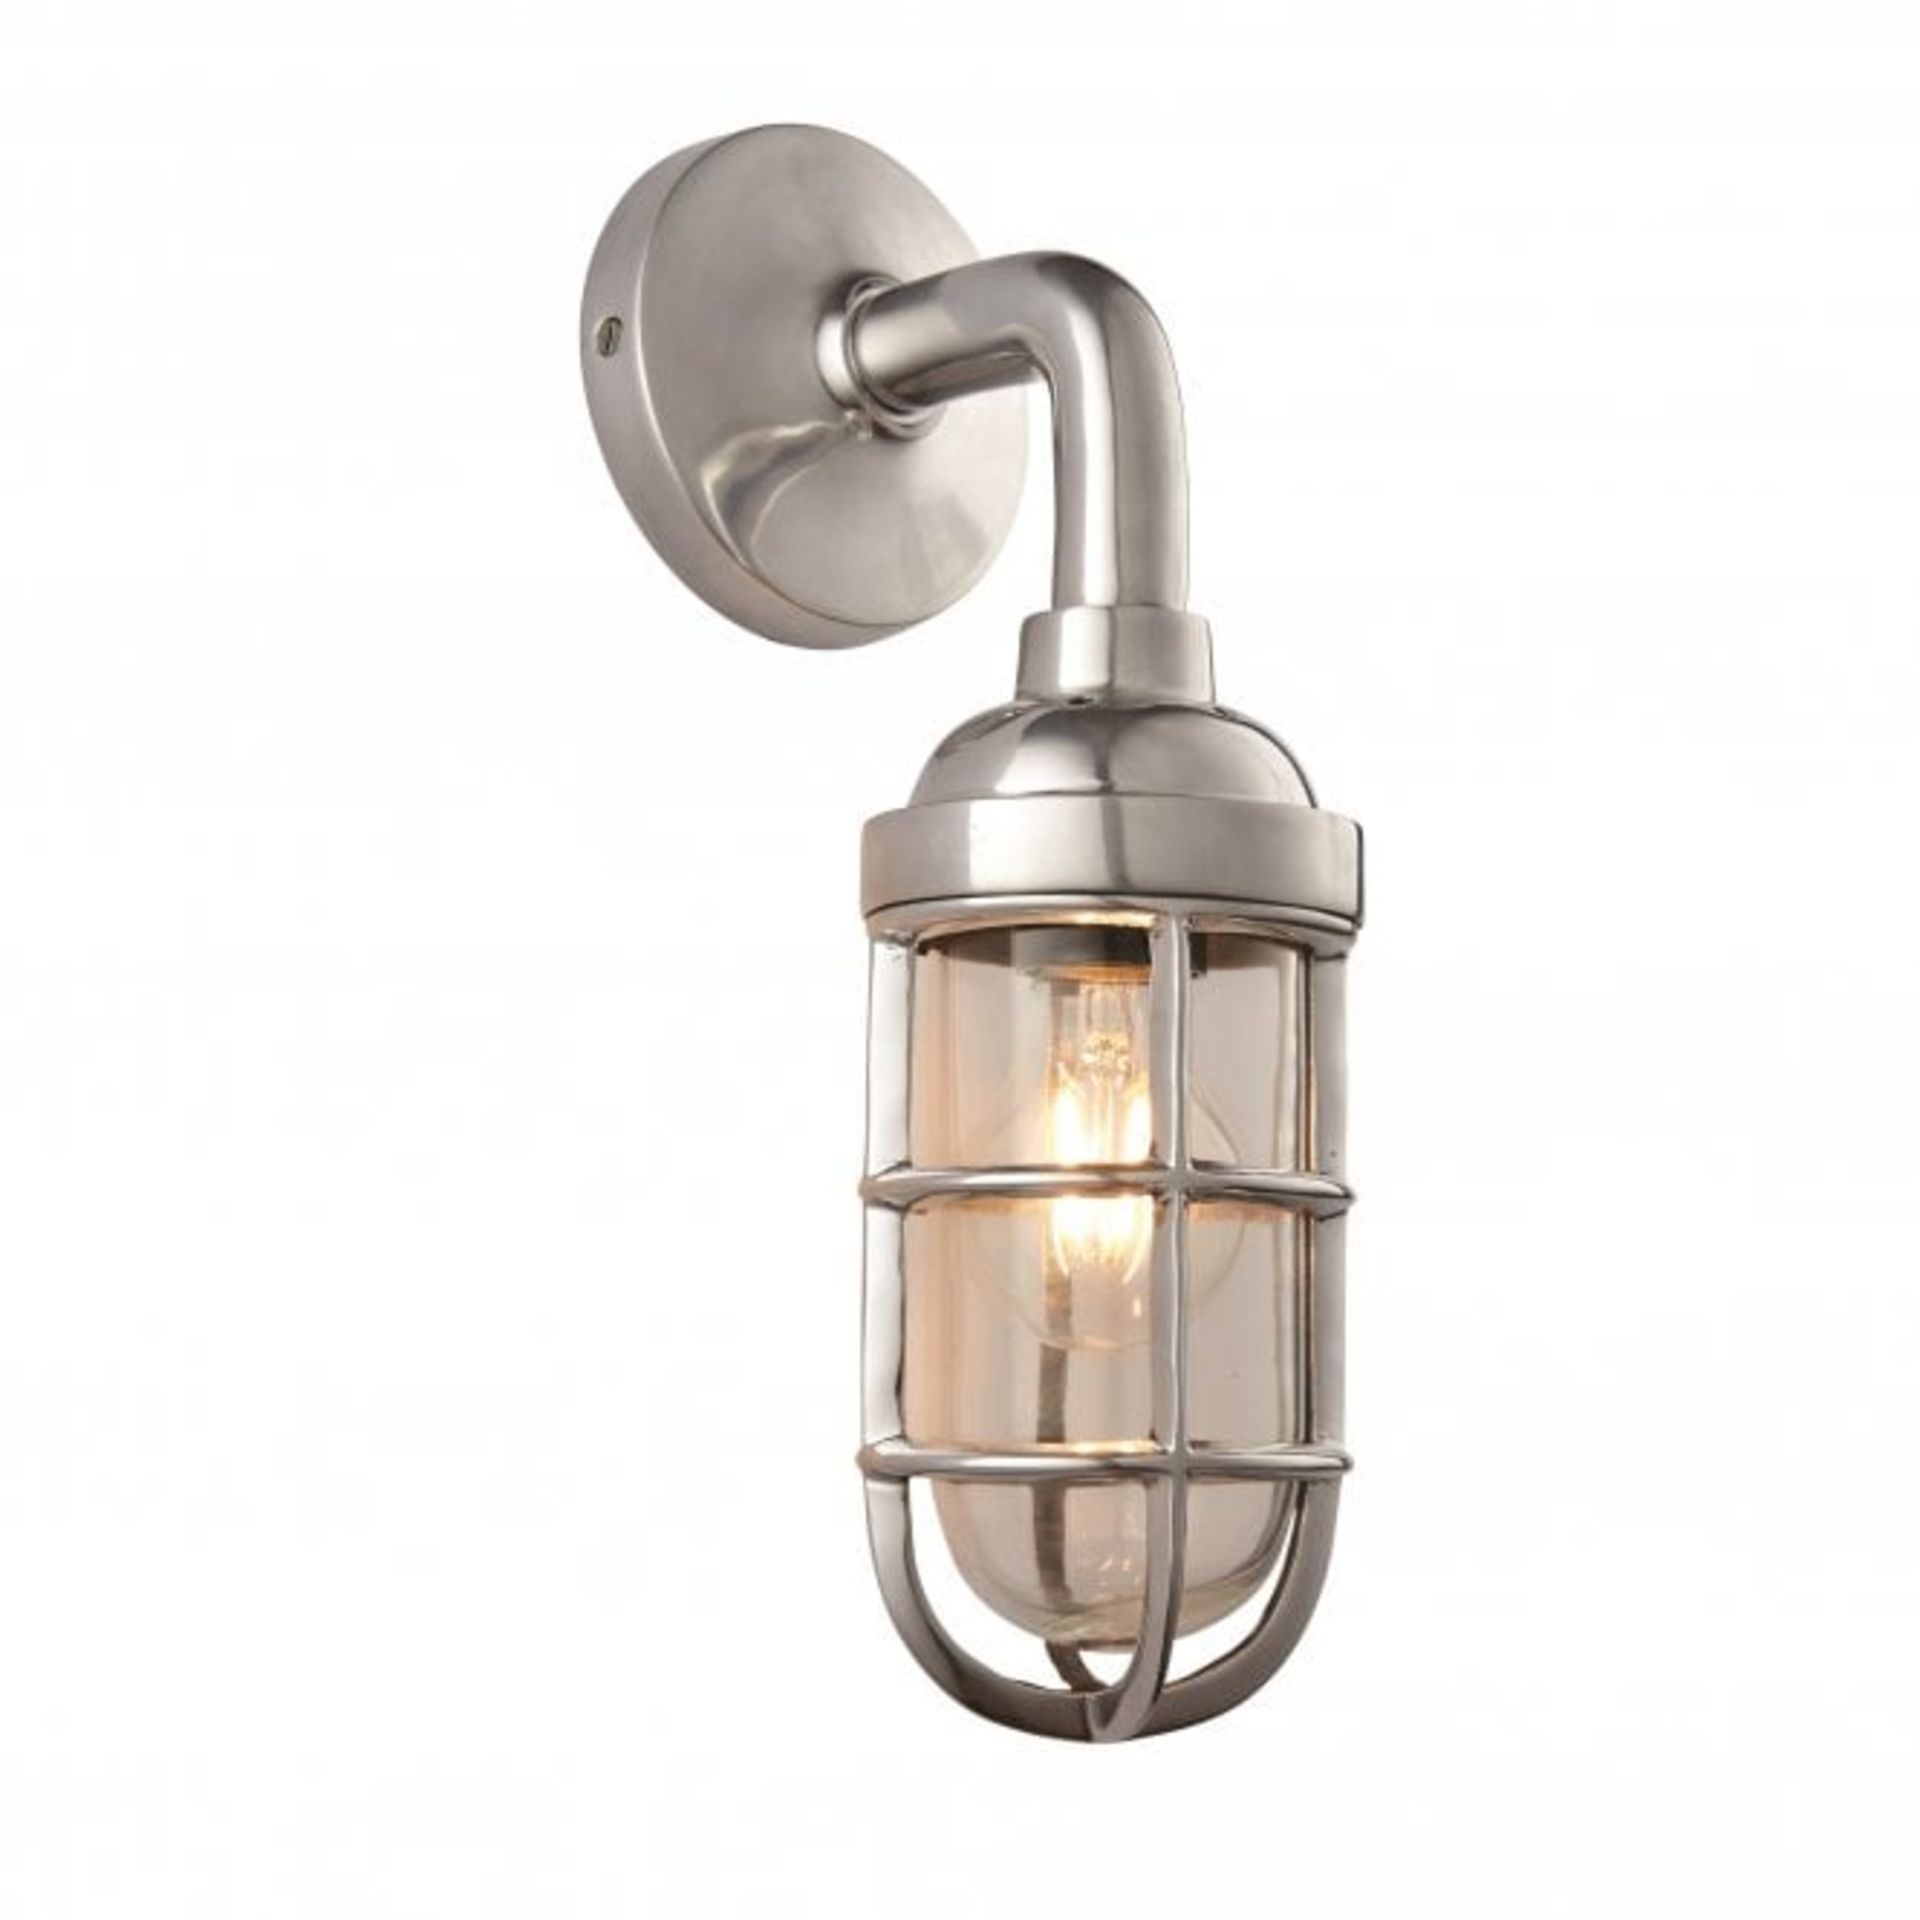 Endon Collection Elcot Polished Aluminium & Clear Glass 1 Light Wall Light 77276 Heavy Cast - Image 2 of 2